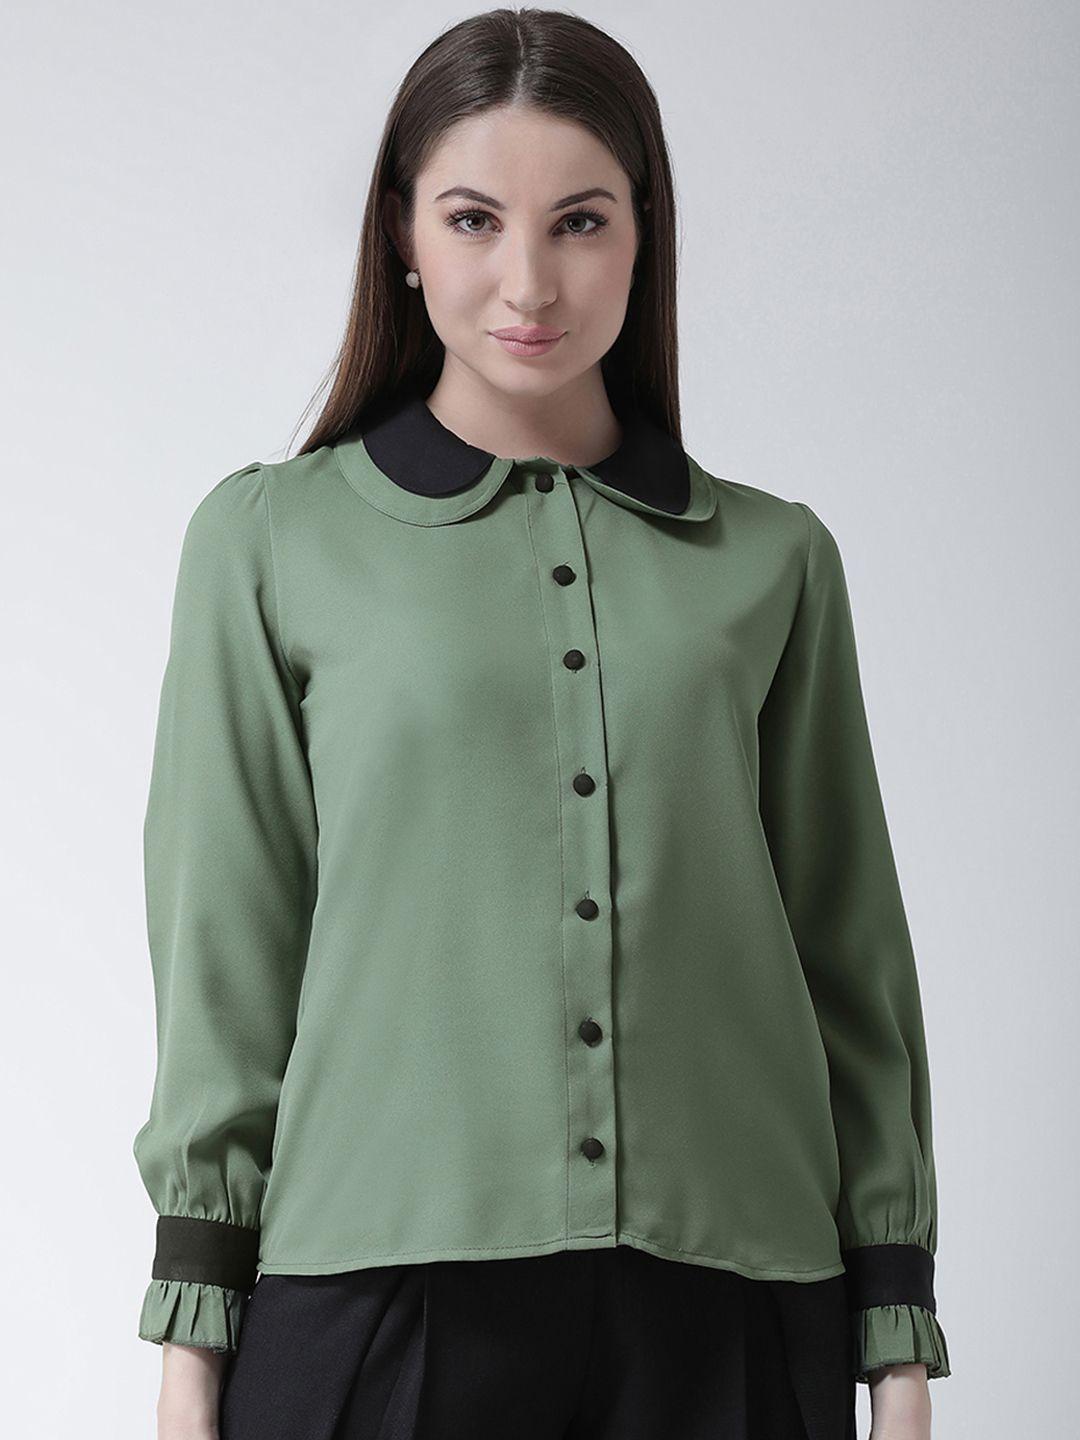 kassually women olive green & black regular fit solid casual shirt